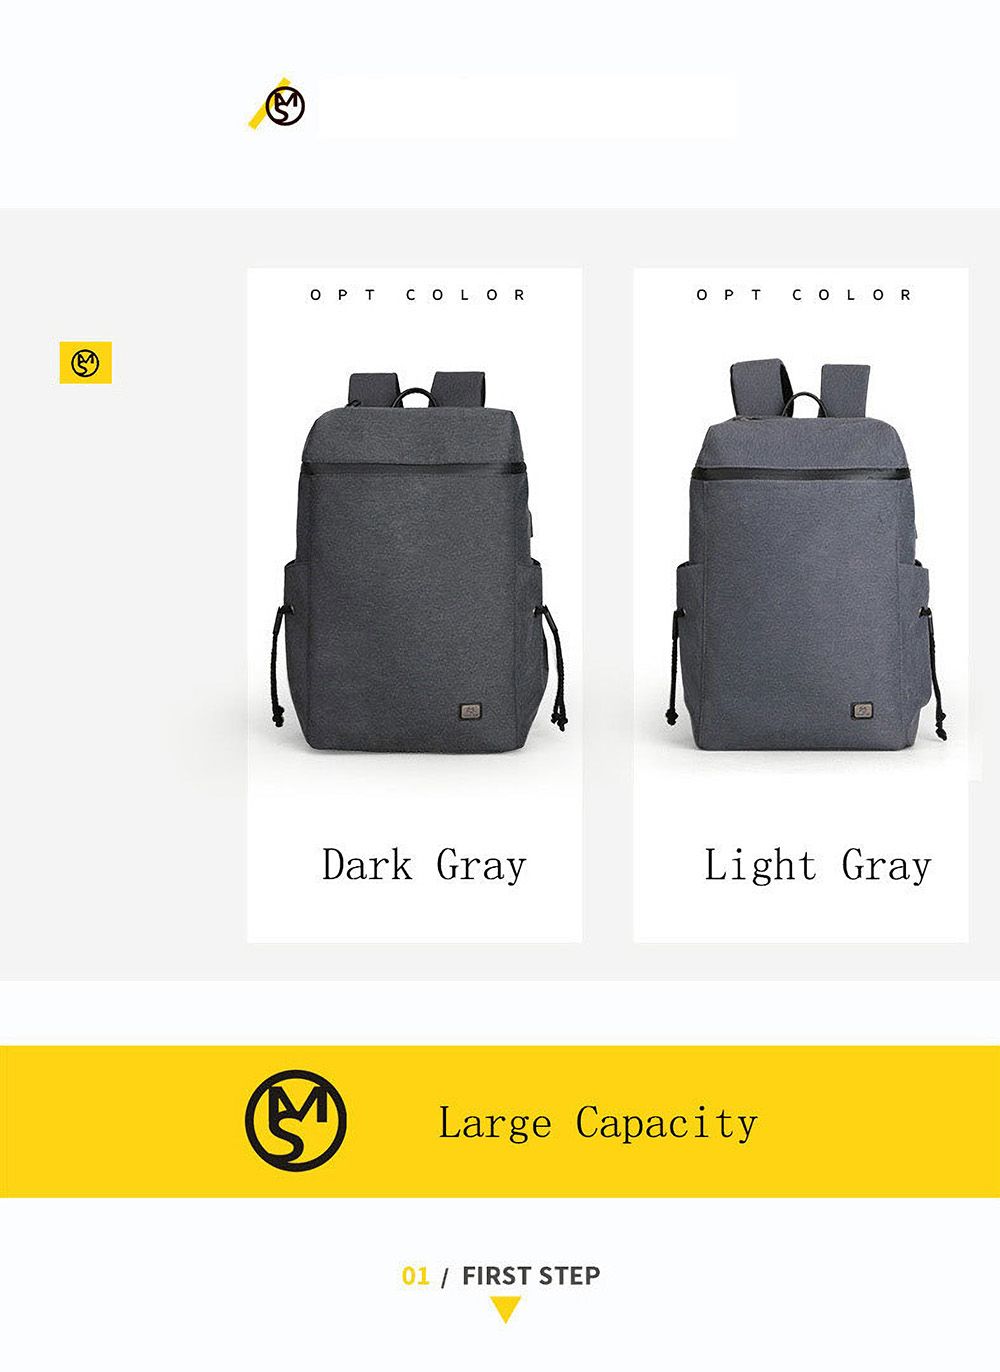 Mazzy-Star-Laptop-Bag-Multifunction-Backpack-with-USB-Charging-Port-Travel-Bag-Water-Resistant-Casua-1546287